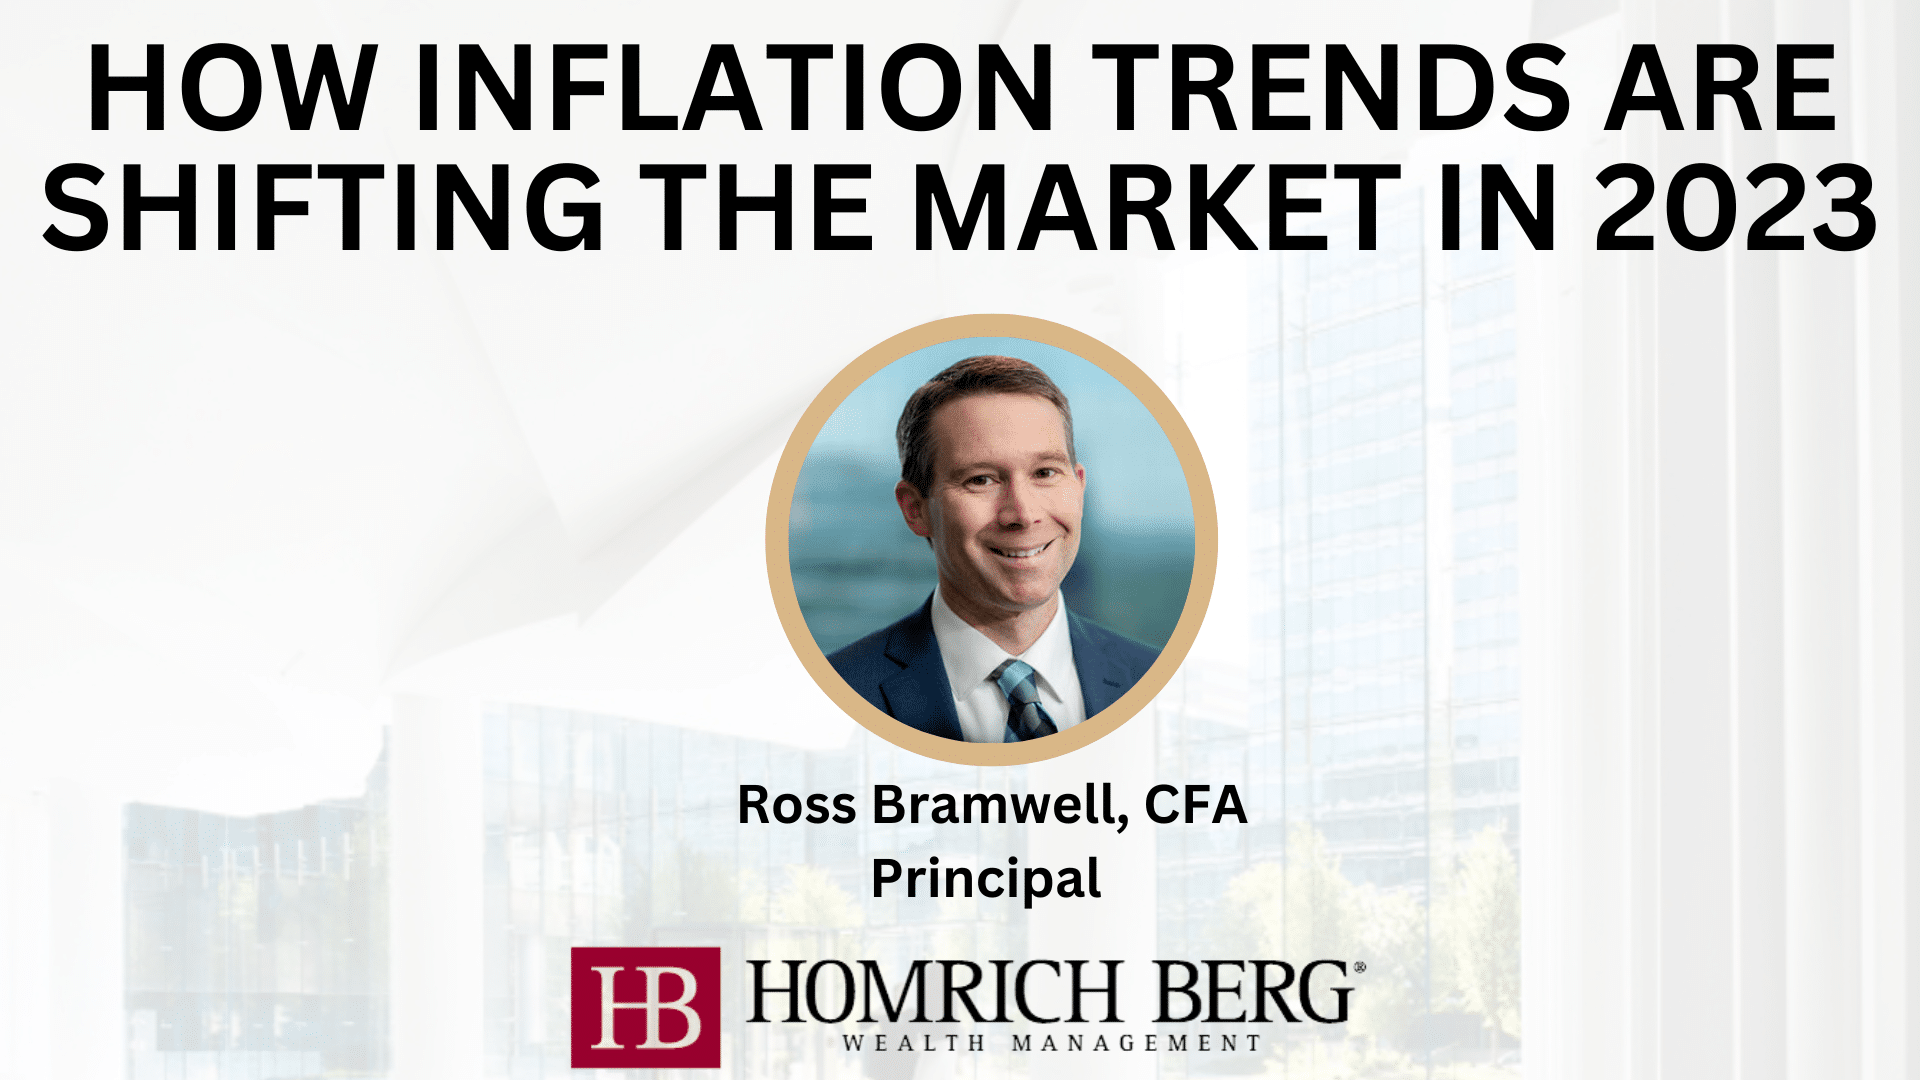 How Inflation Trends Are Shifting the Market